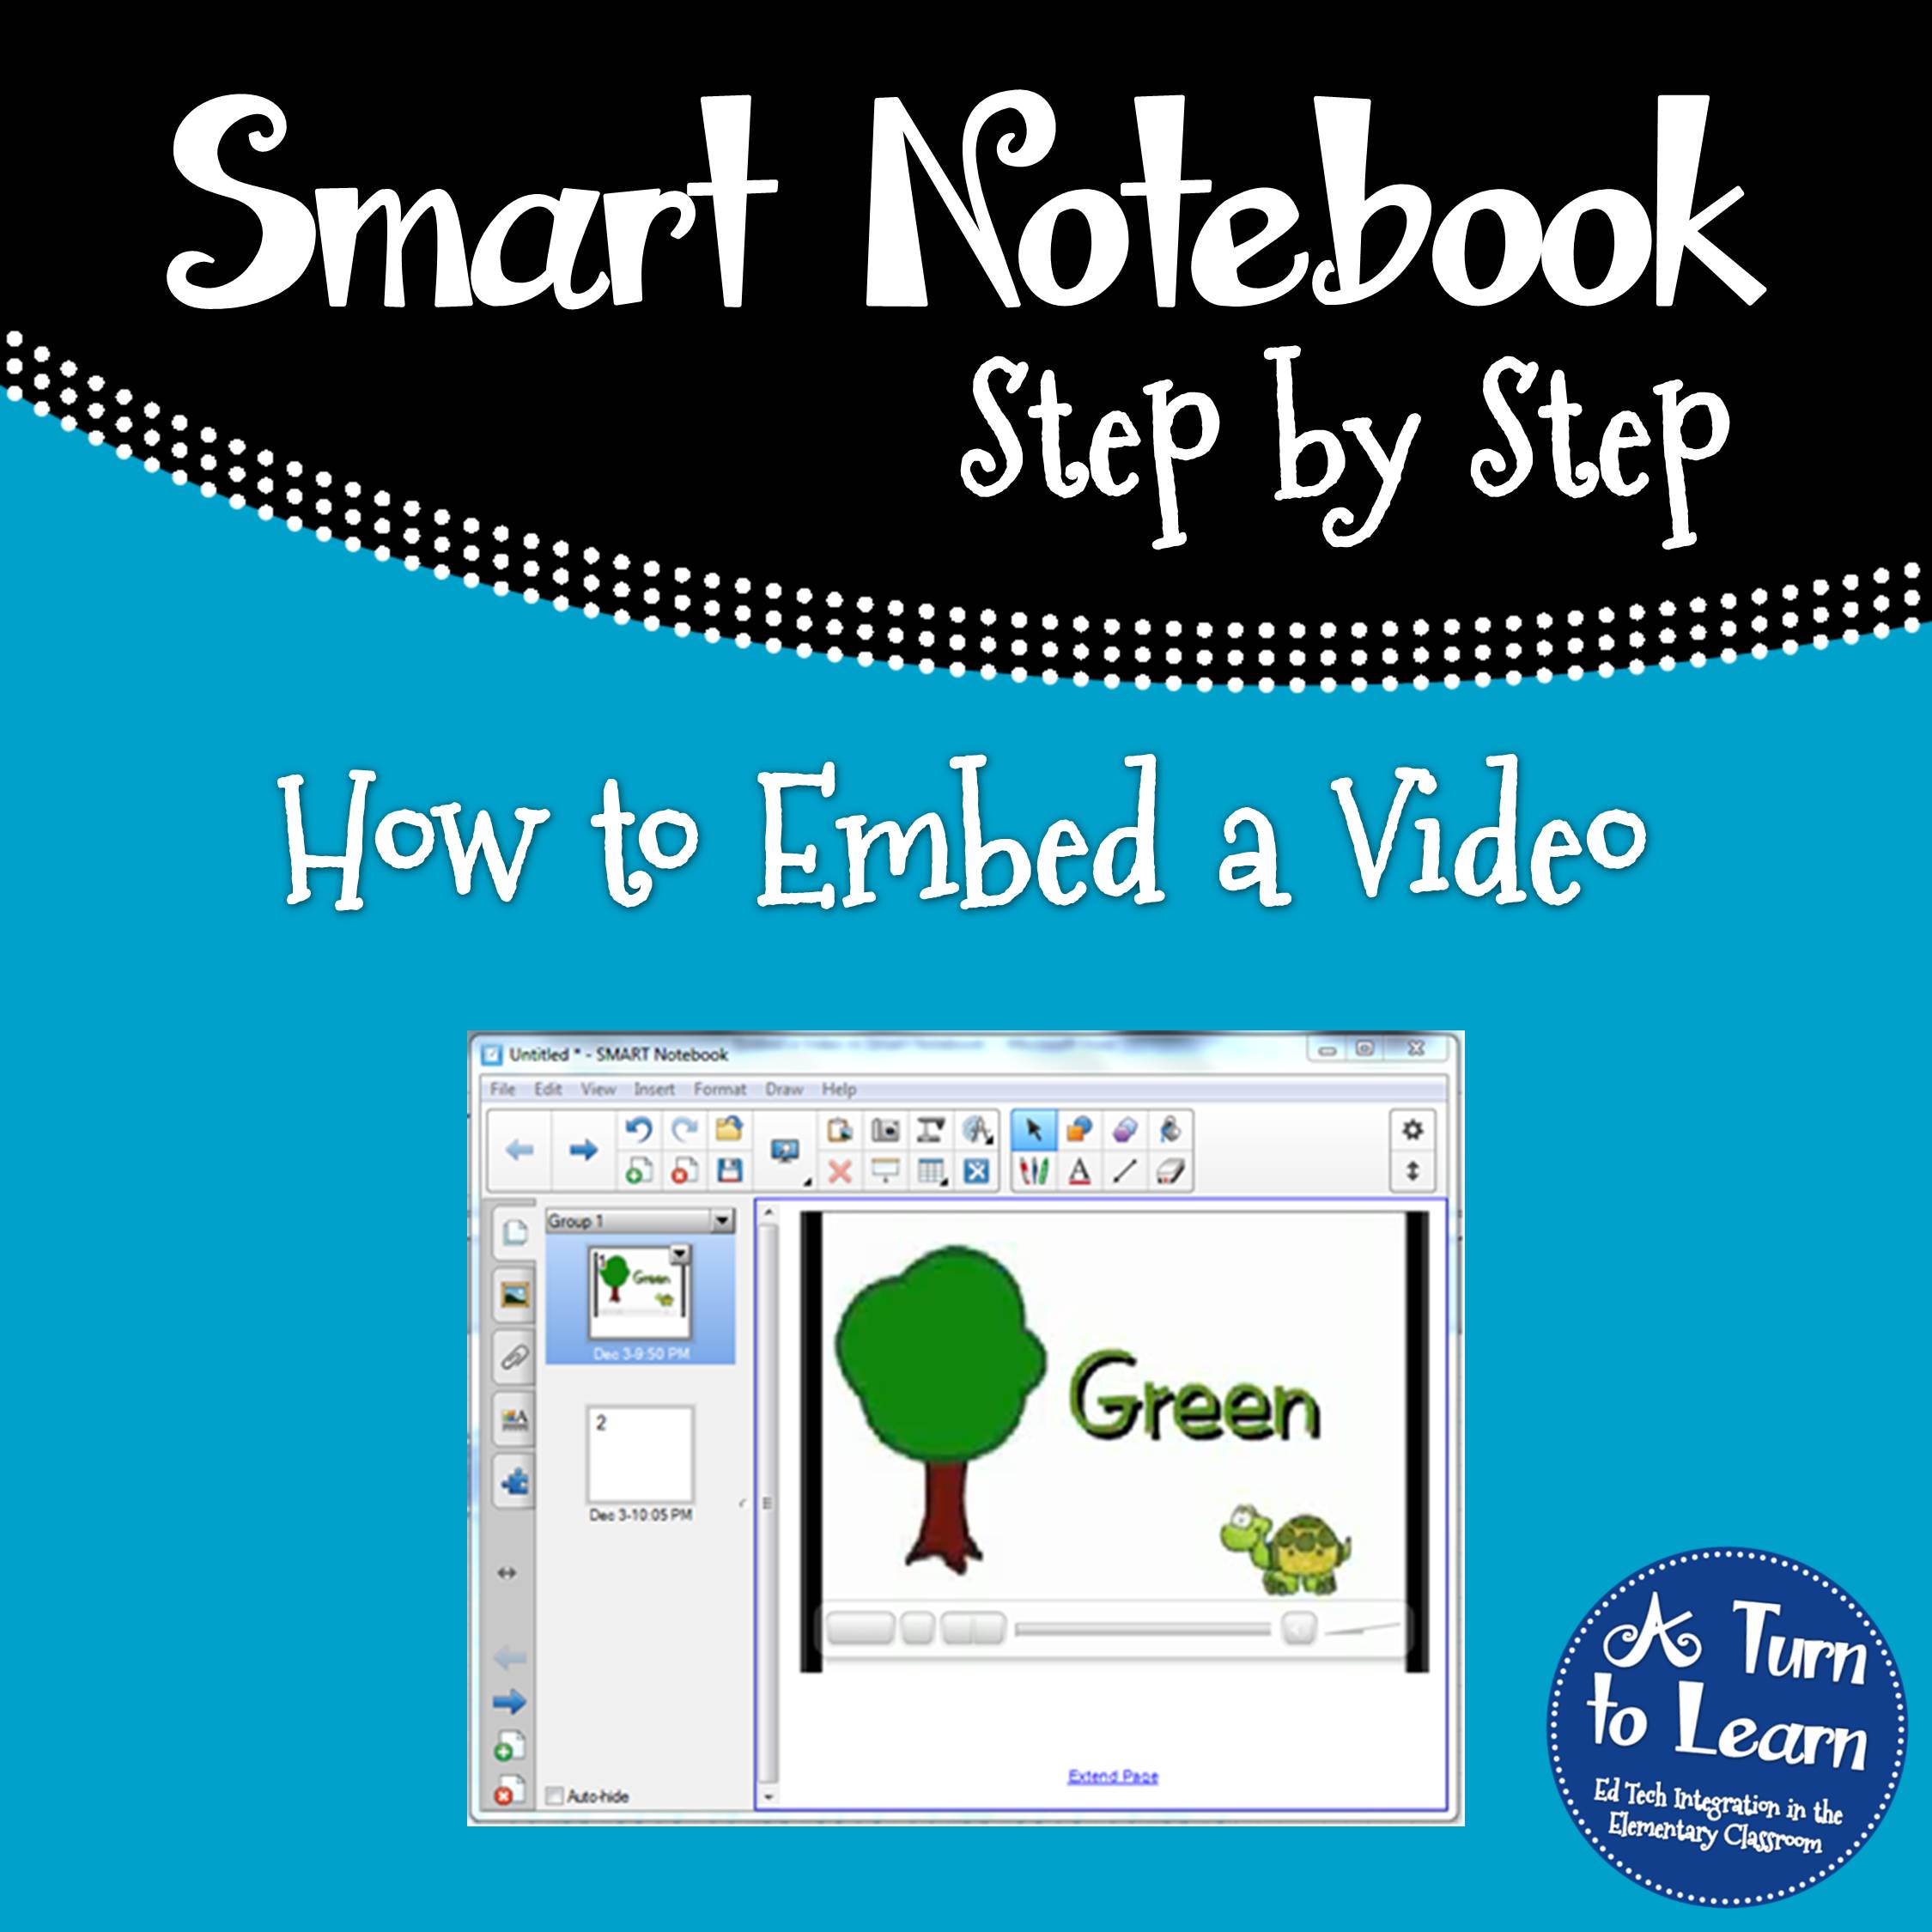 How to Embed a Video in Smart Notebook